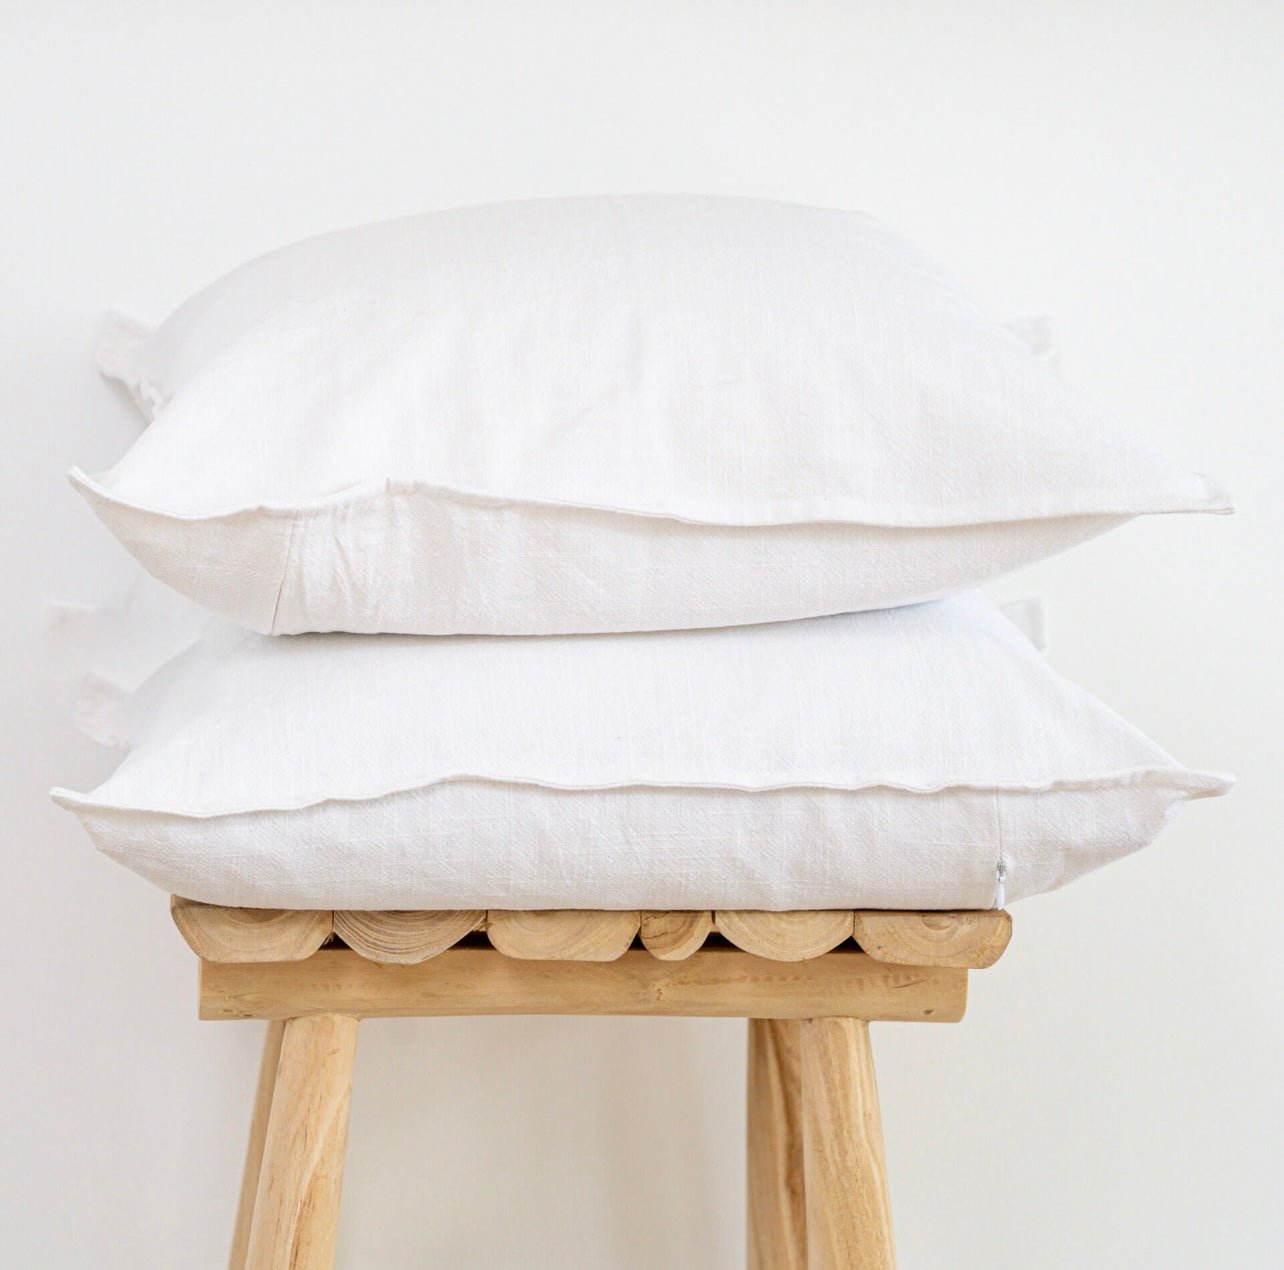 Prado Linen Cushion Cover - Buy Cushion Cover Online at FRANKY'S